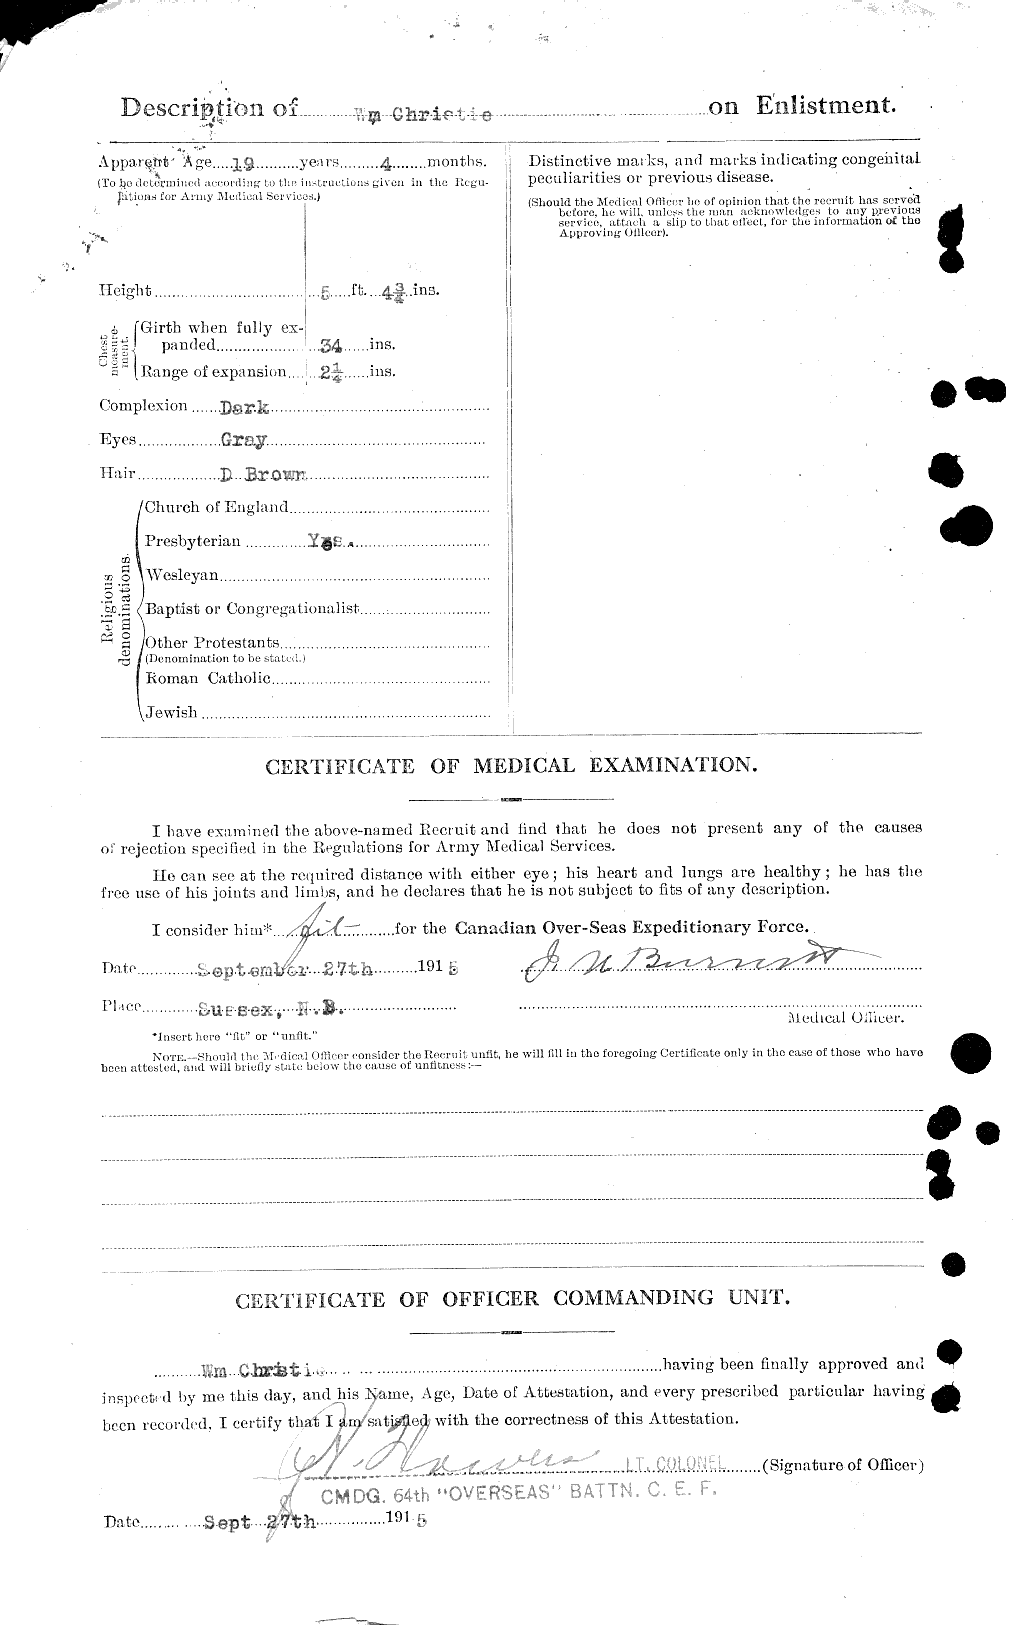 Personnel Records of the First World War - CEF 022087b